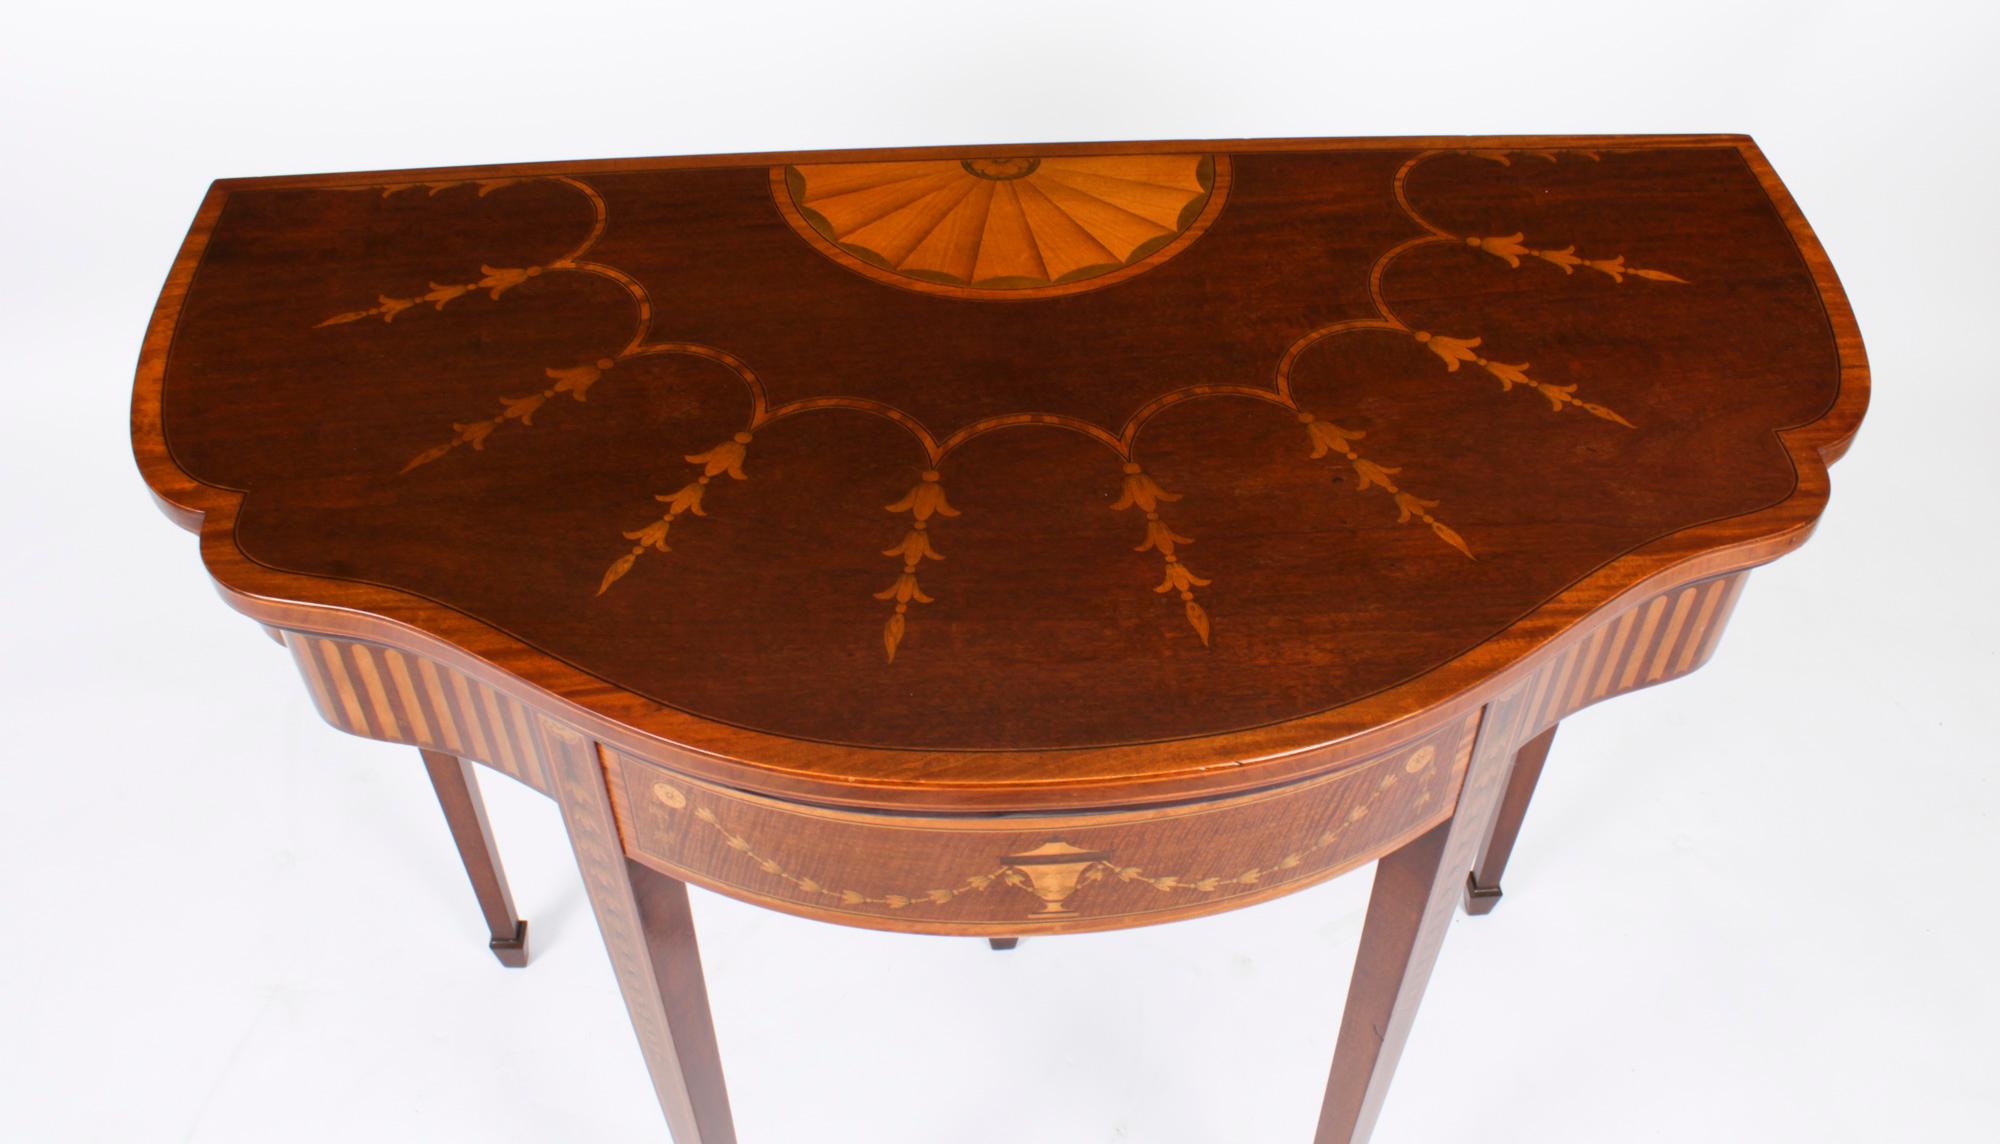 Antique Mahogany and Satinwood Inlaid Serpentine Card Console Table 19th Century For Sale 6